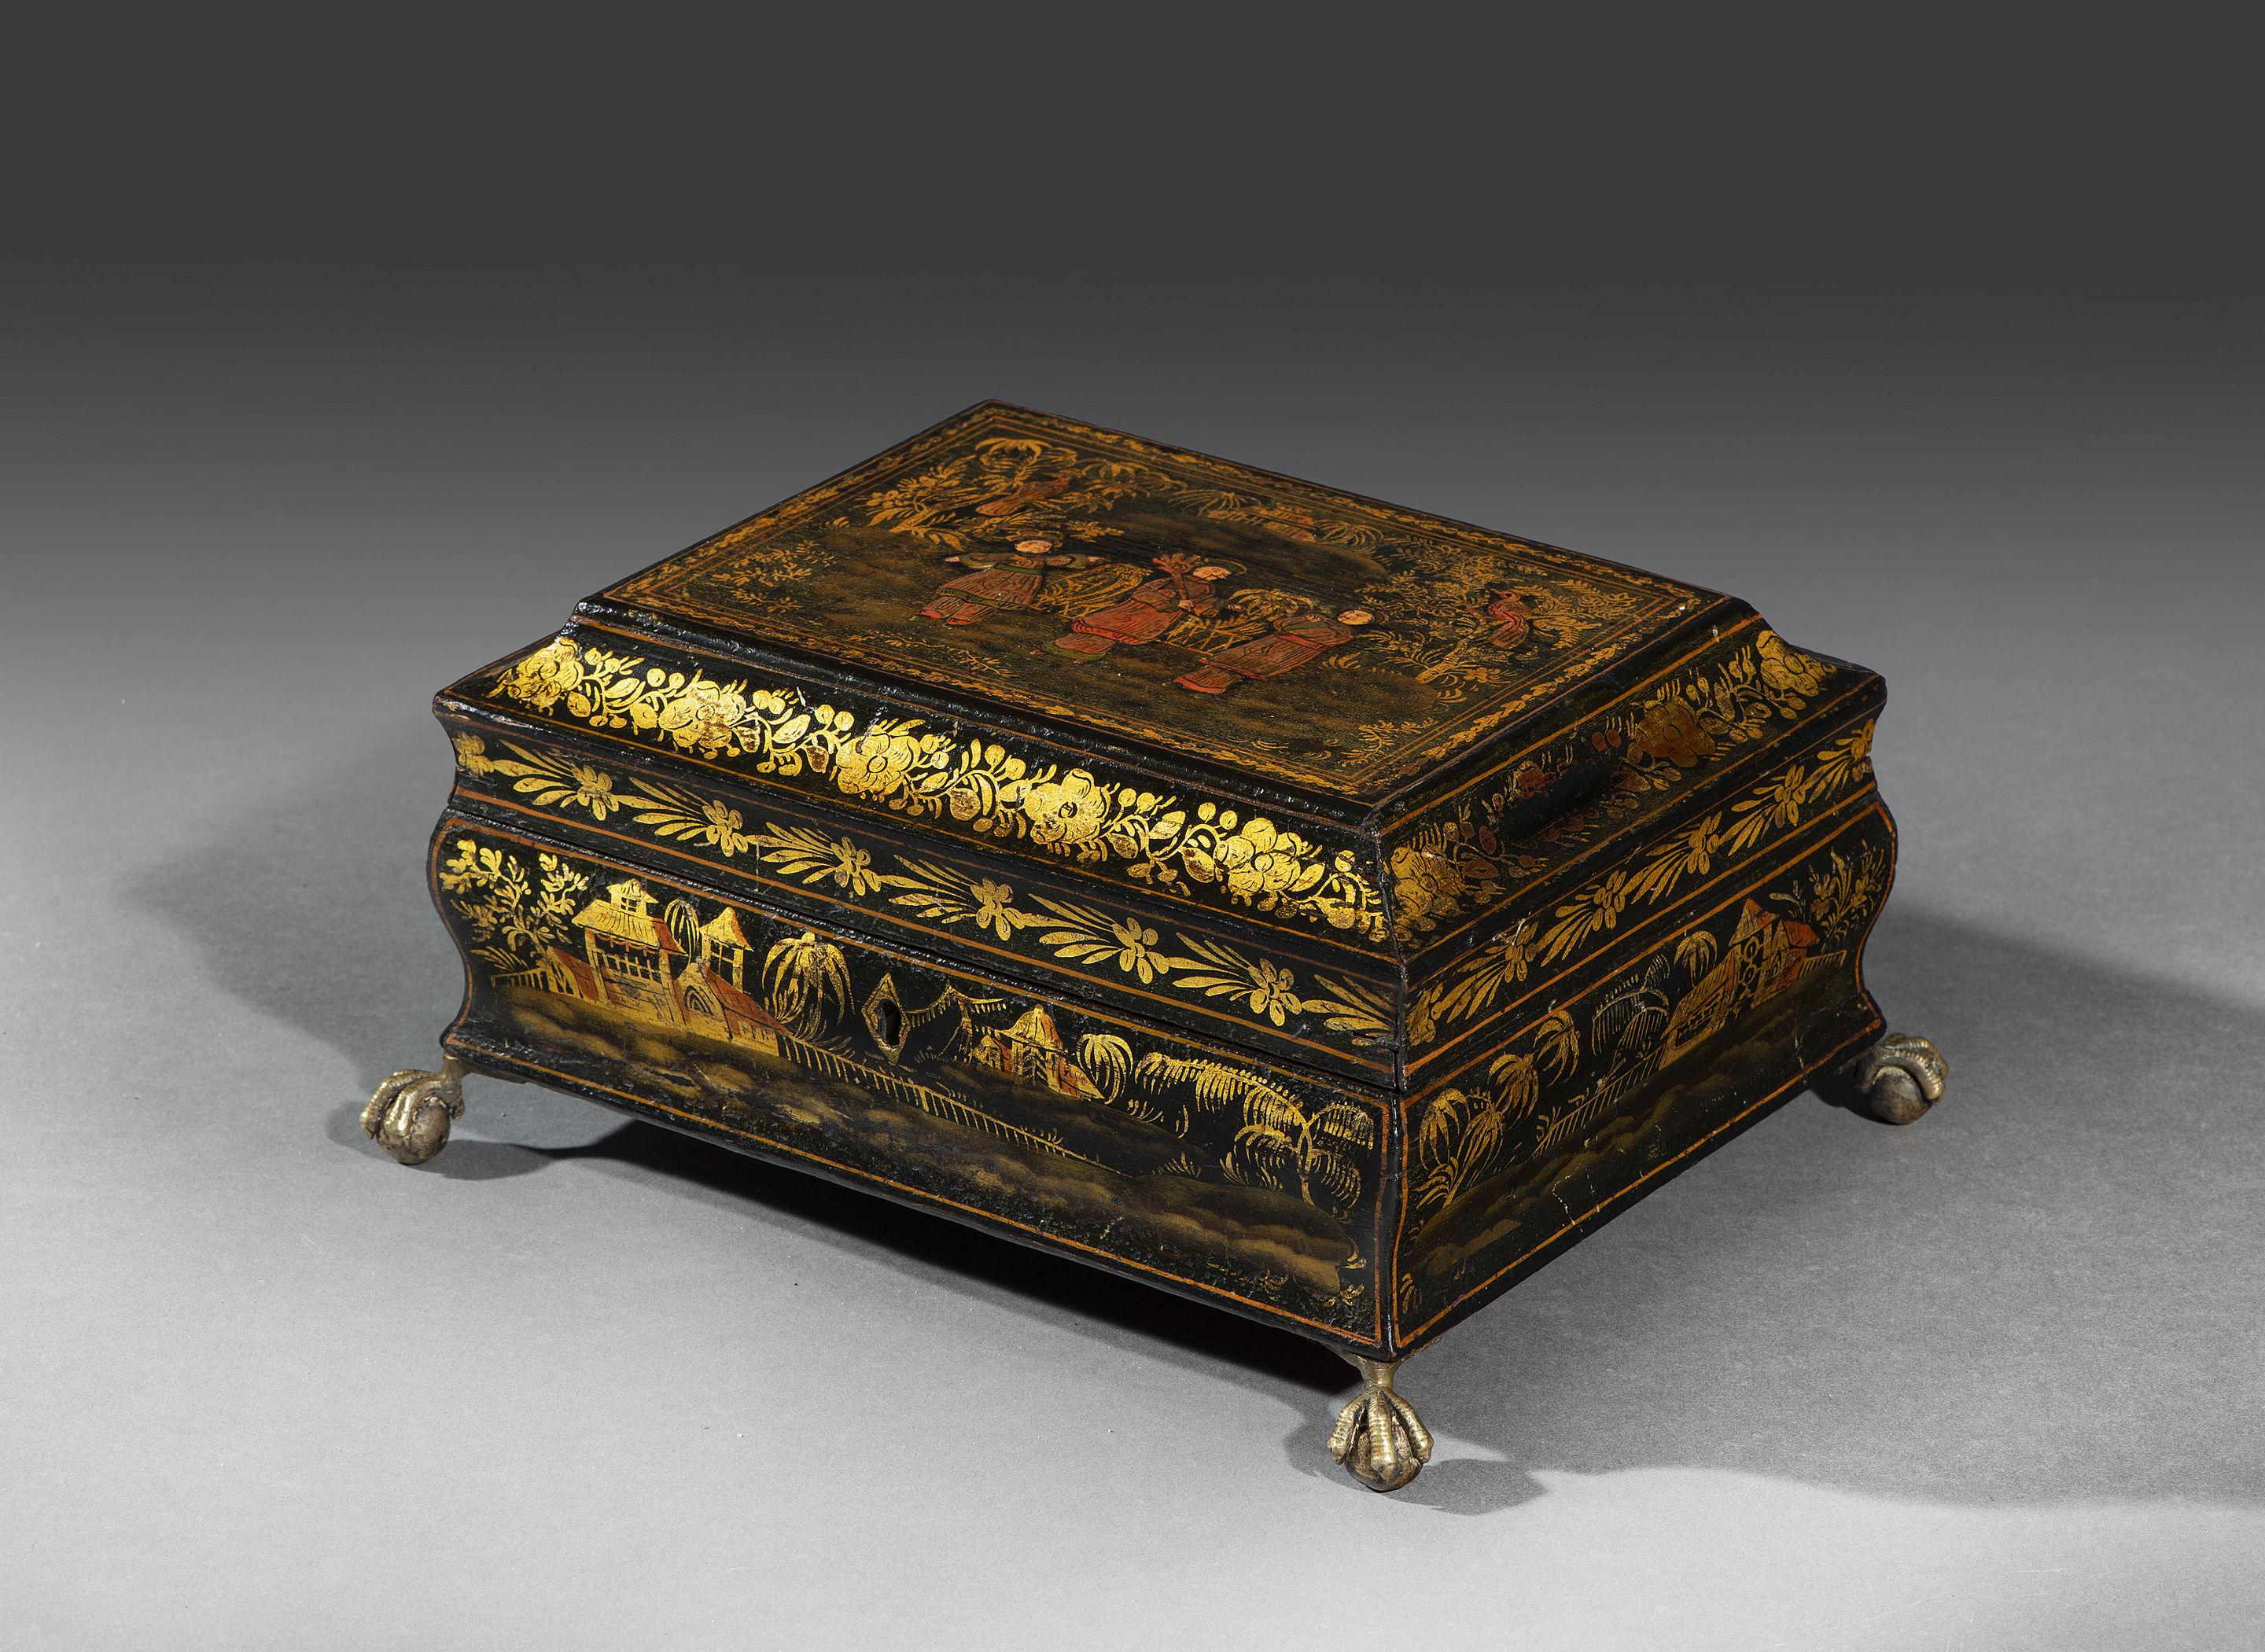 English Regency Period Japanned and Chinoiserie Lacquered Casket Standing on Brass Feet